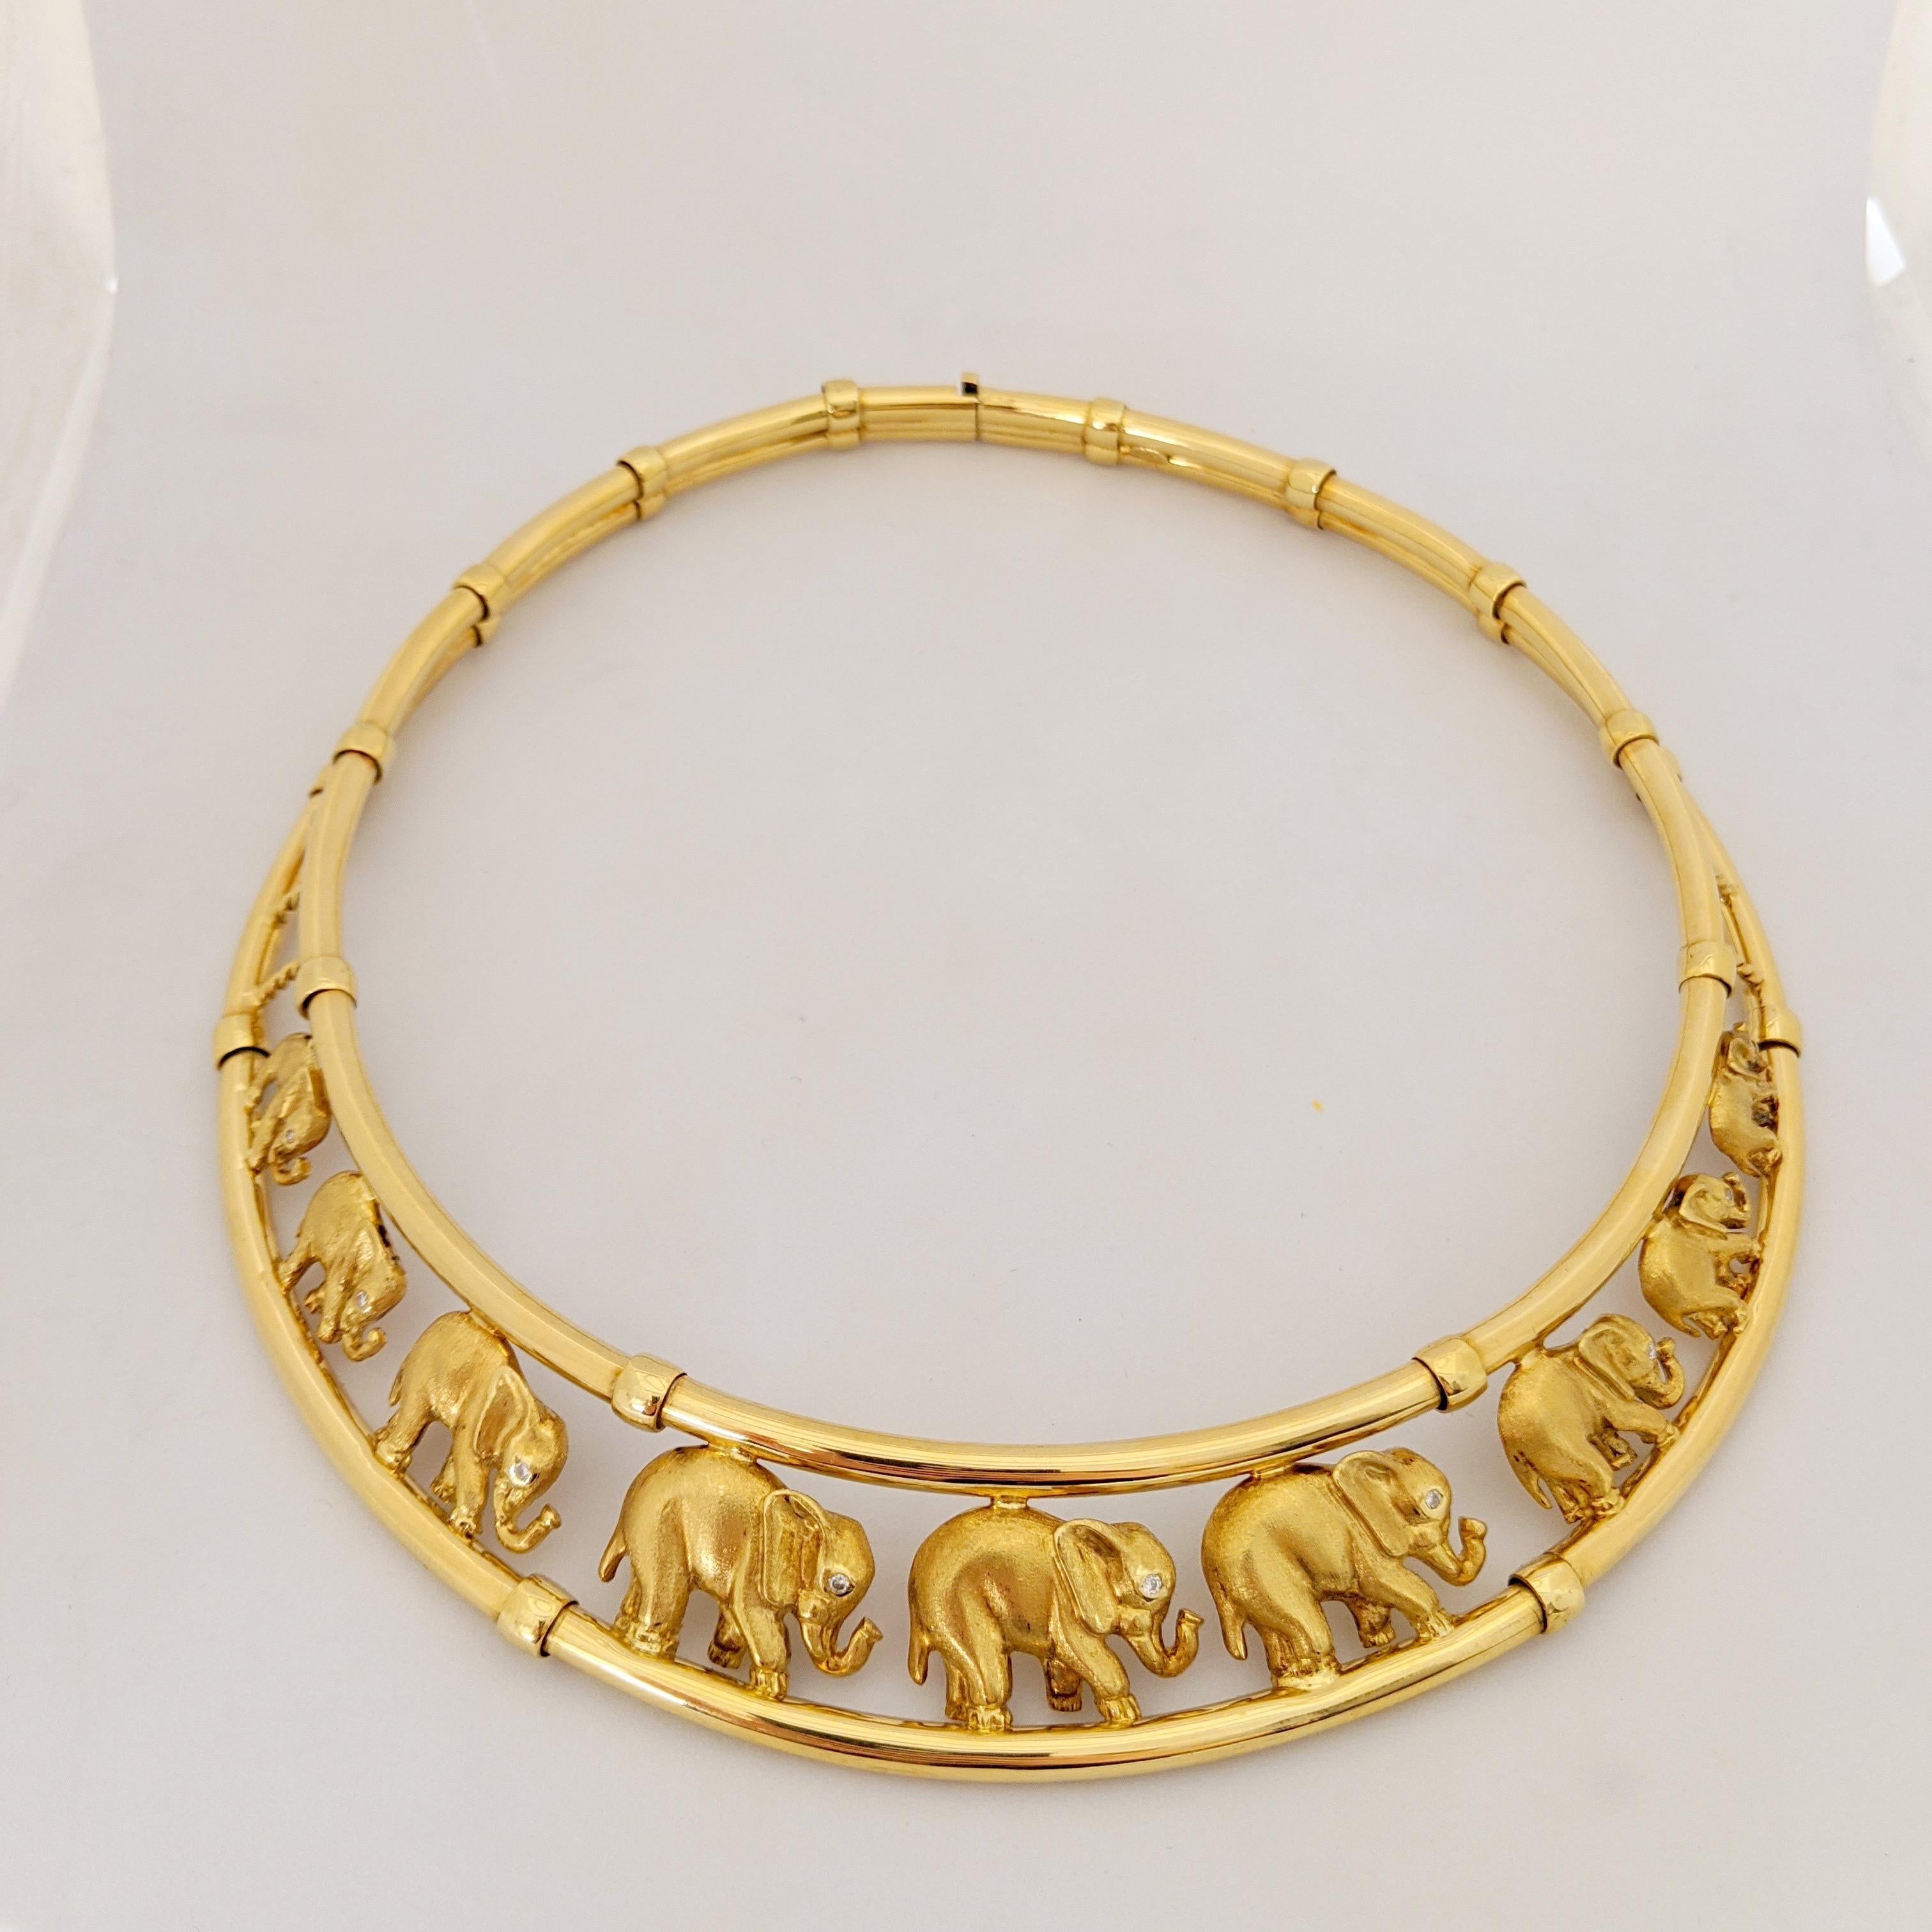 Roberto Coin 18 Karat Yellow Gold Vintage Collar Necklace with 9 Elephants 1